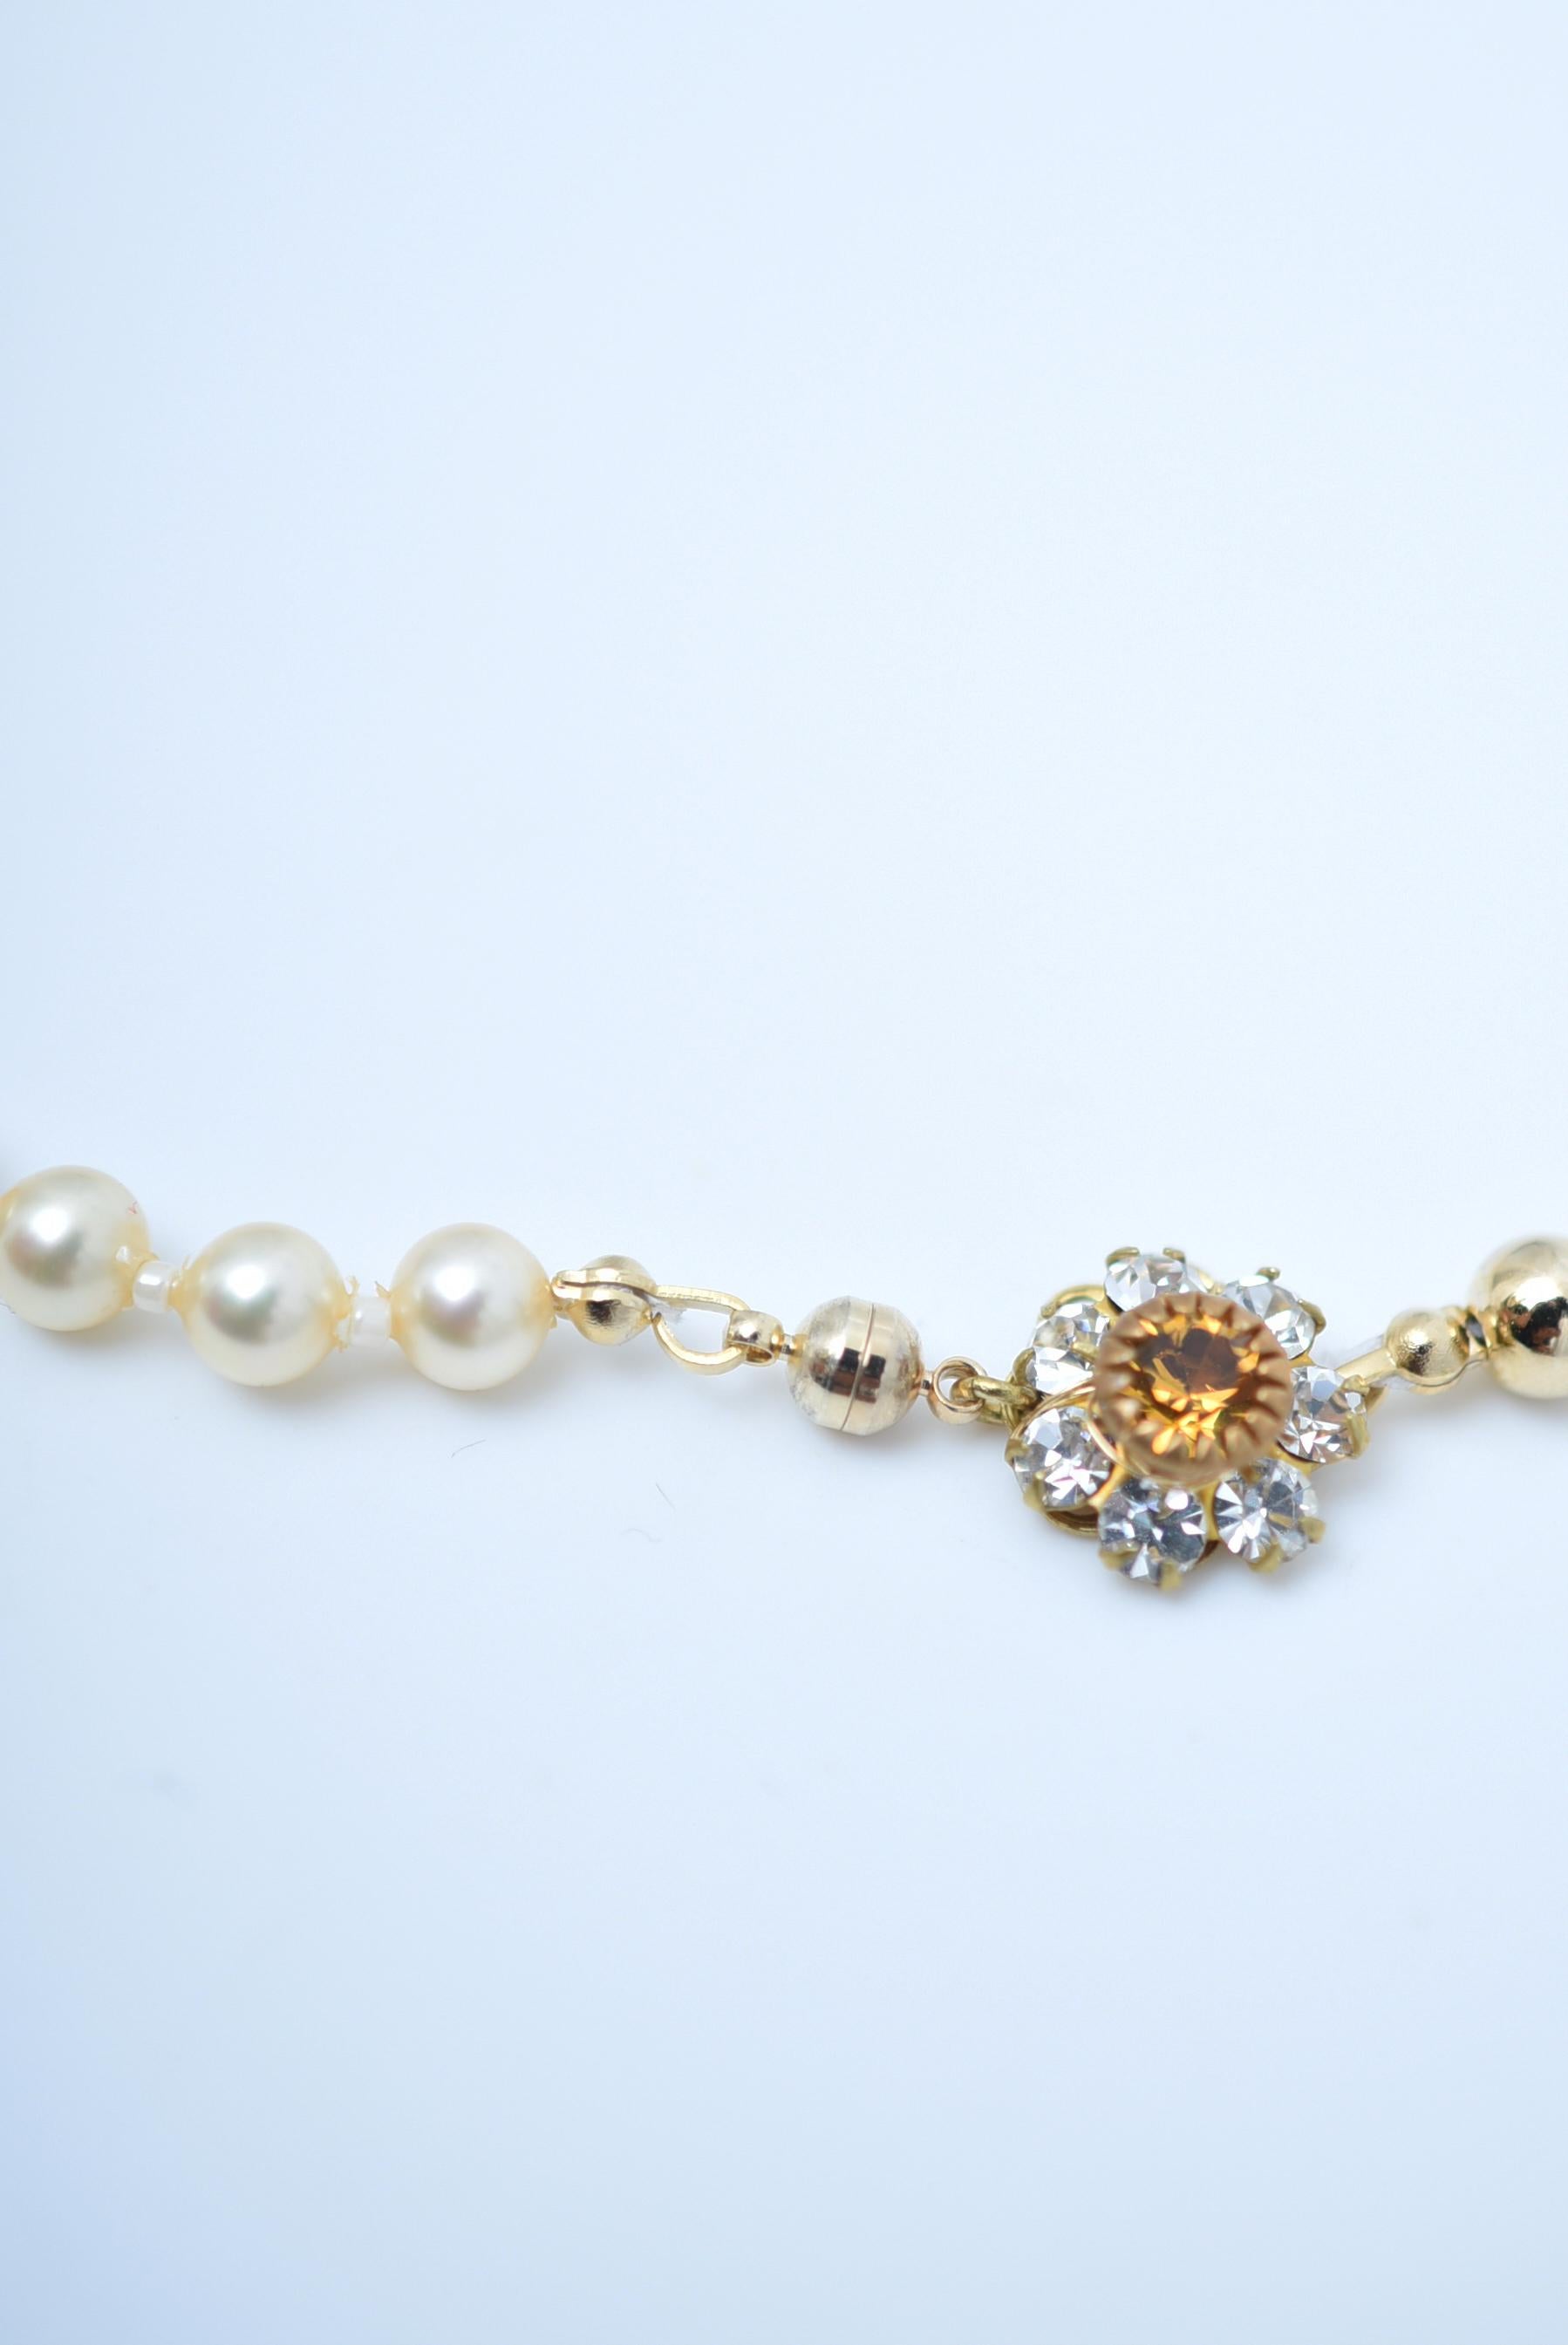 material:Brass, Vintage 1970s Japanese glass pearl,magnet,18k coating
size:around 41.5cm

The expression of this necklace changes depending on the position of the motifs.
Please try wearing it in different positions of the flowers.
Please enjoy